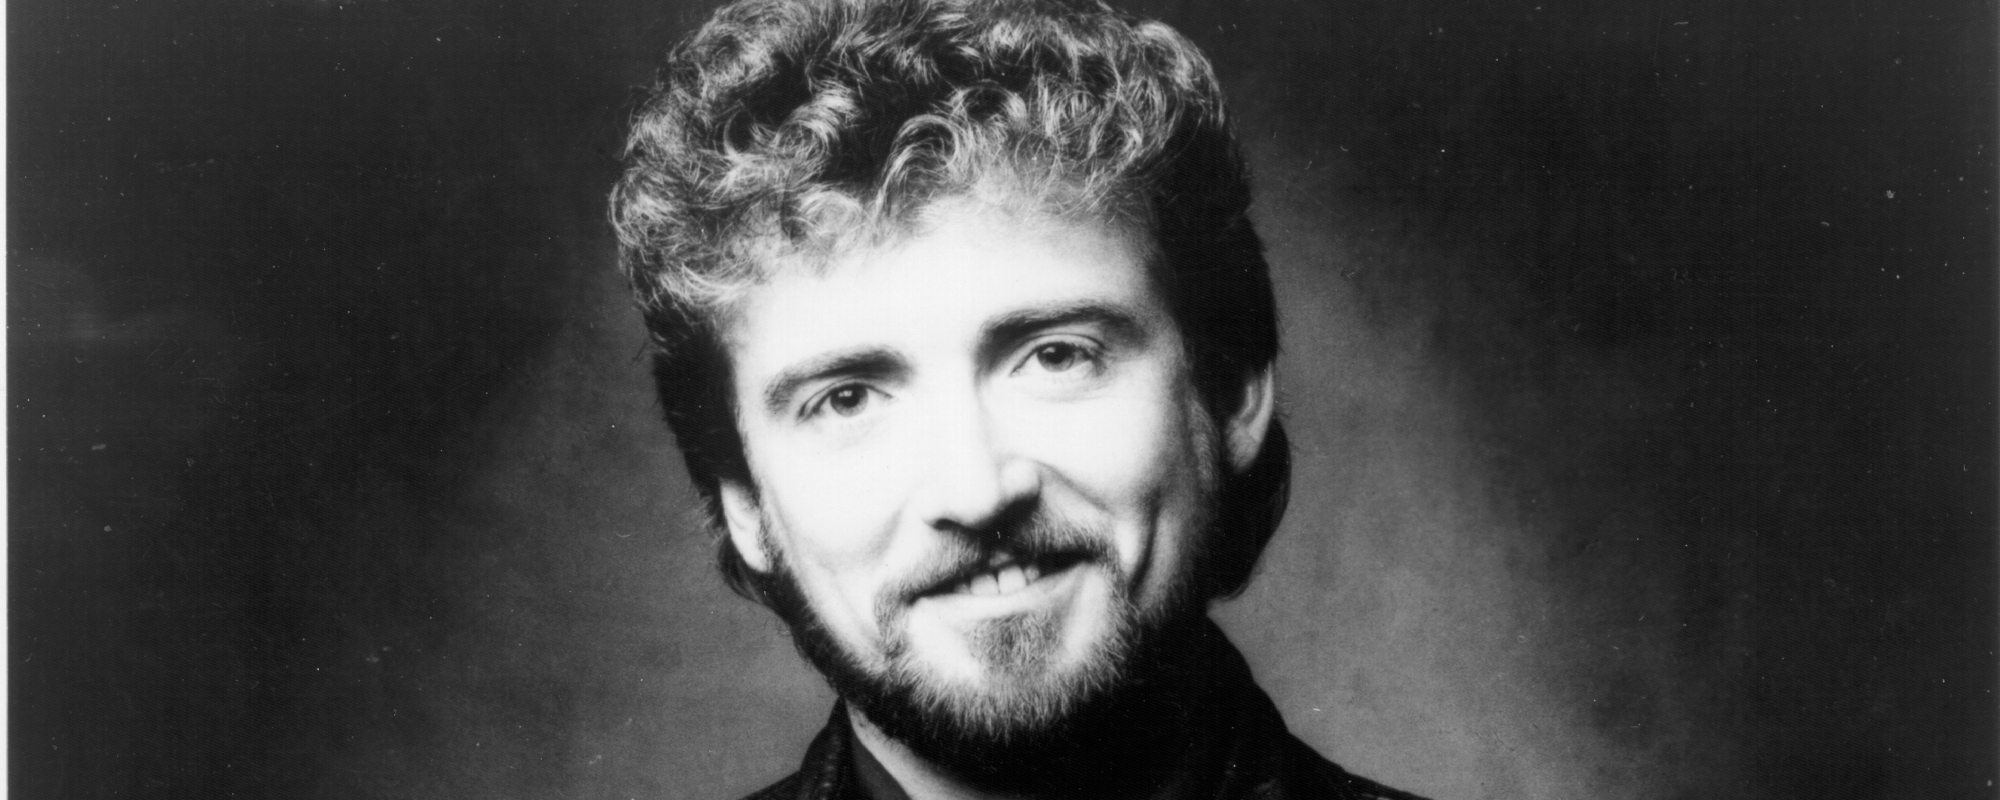 Garth Brooks, Lorrie Morgan and More to Celebrate Keith Whitley at the Opry